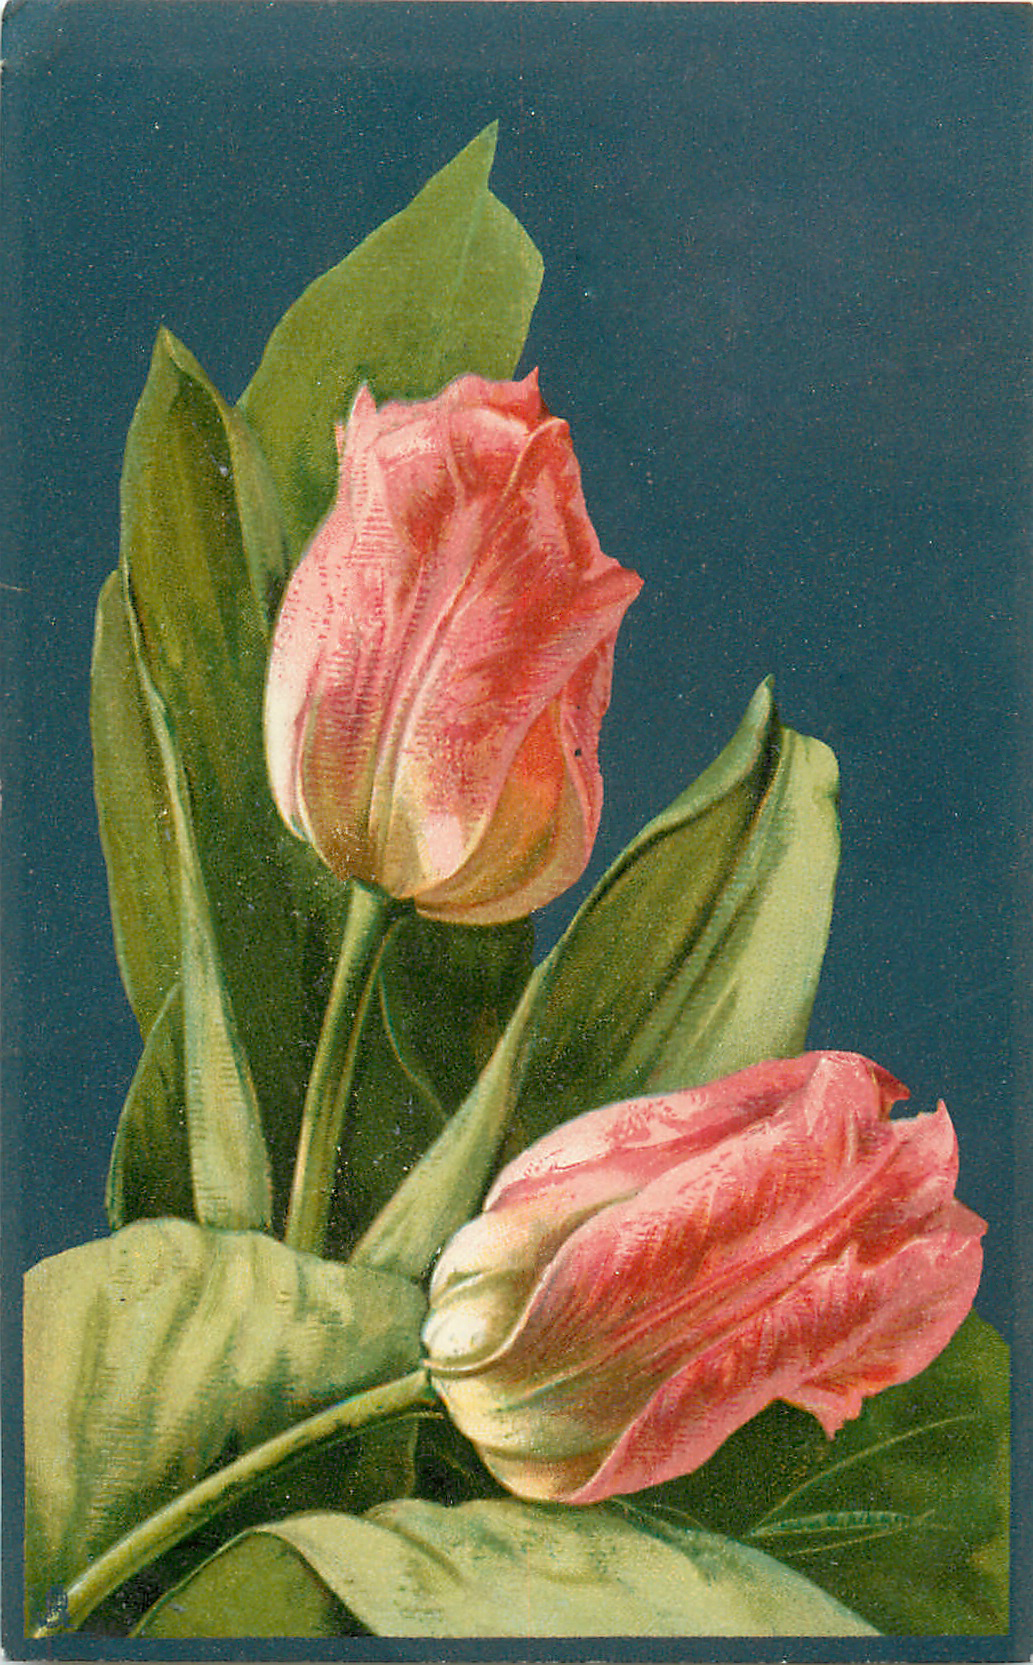 Botanical Postcard Pretty Red and Pink Tulips Spring Blooms Vintage repro 